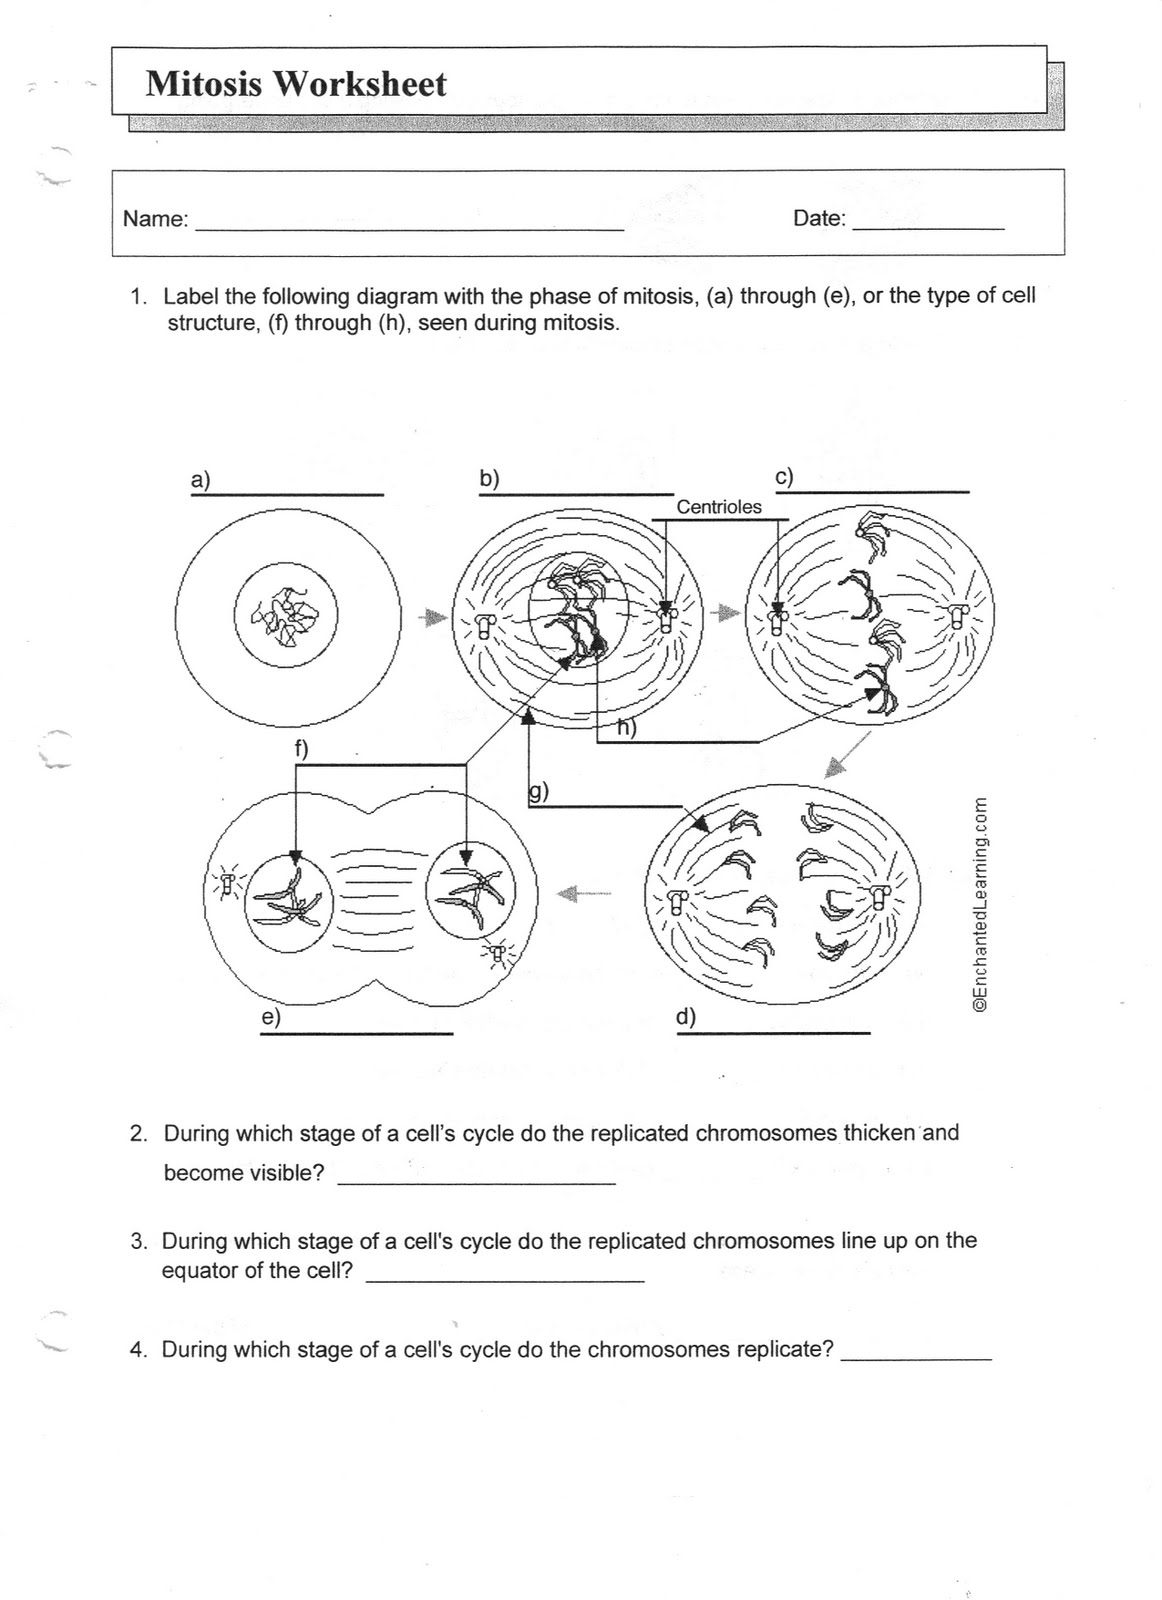 cell-division-review-worksheet-answer-key-harry-carrol-s-english-worksheets